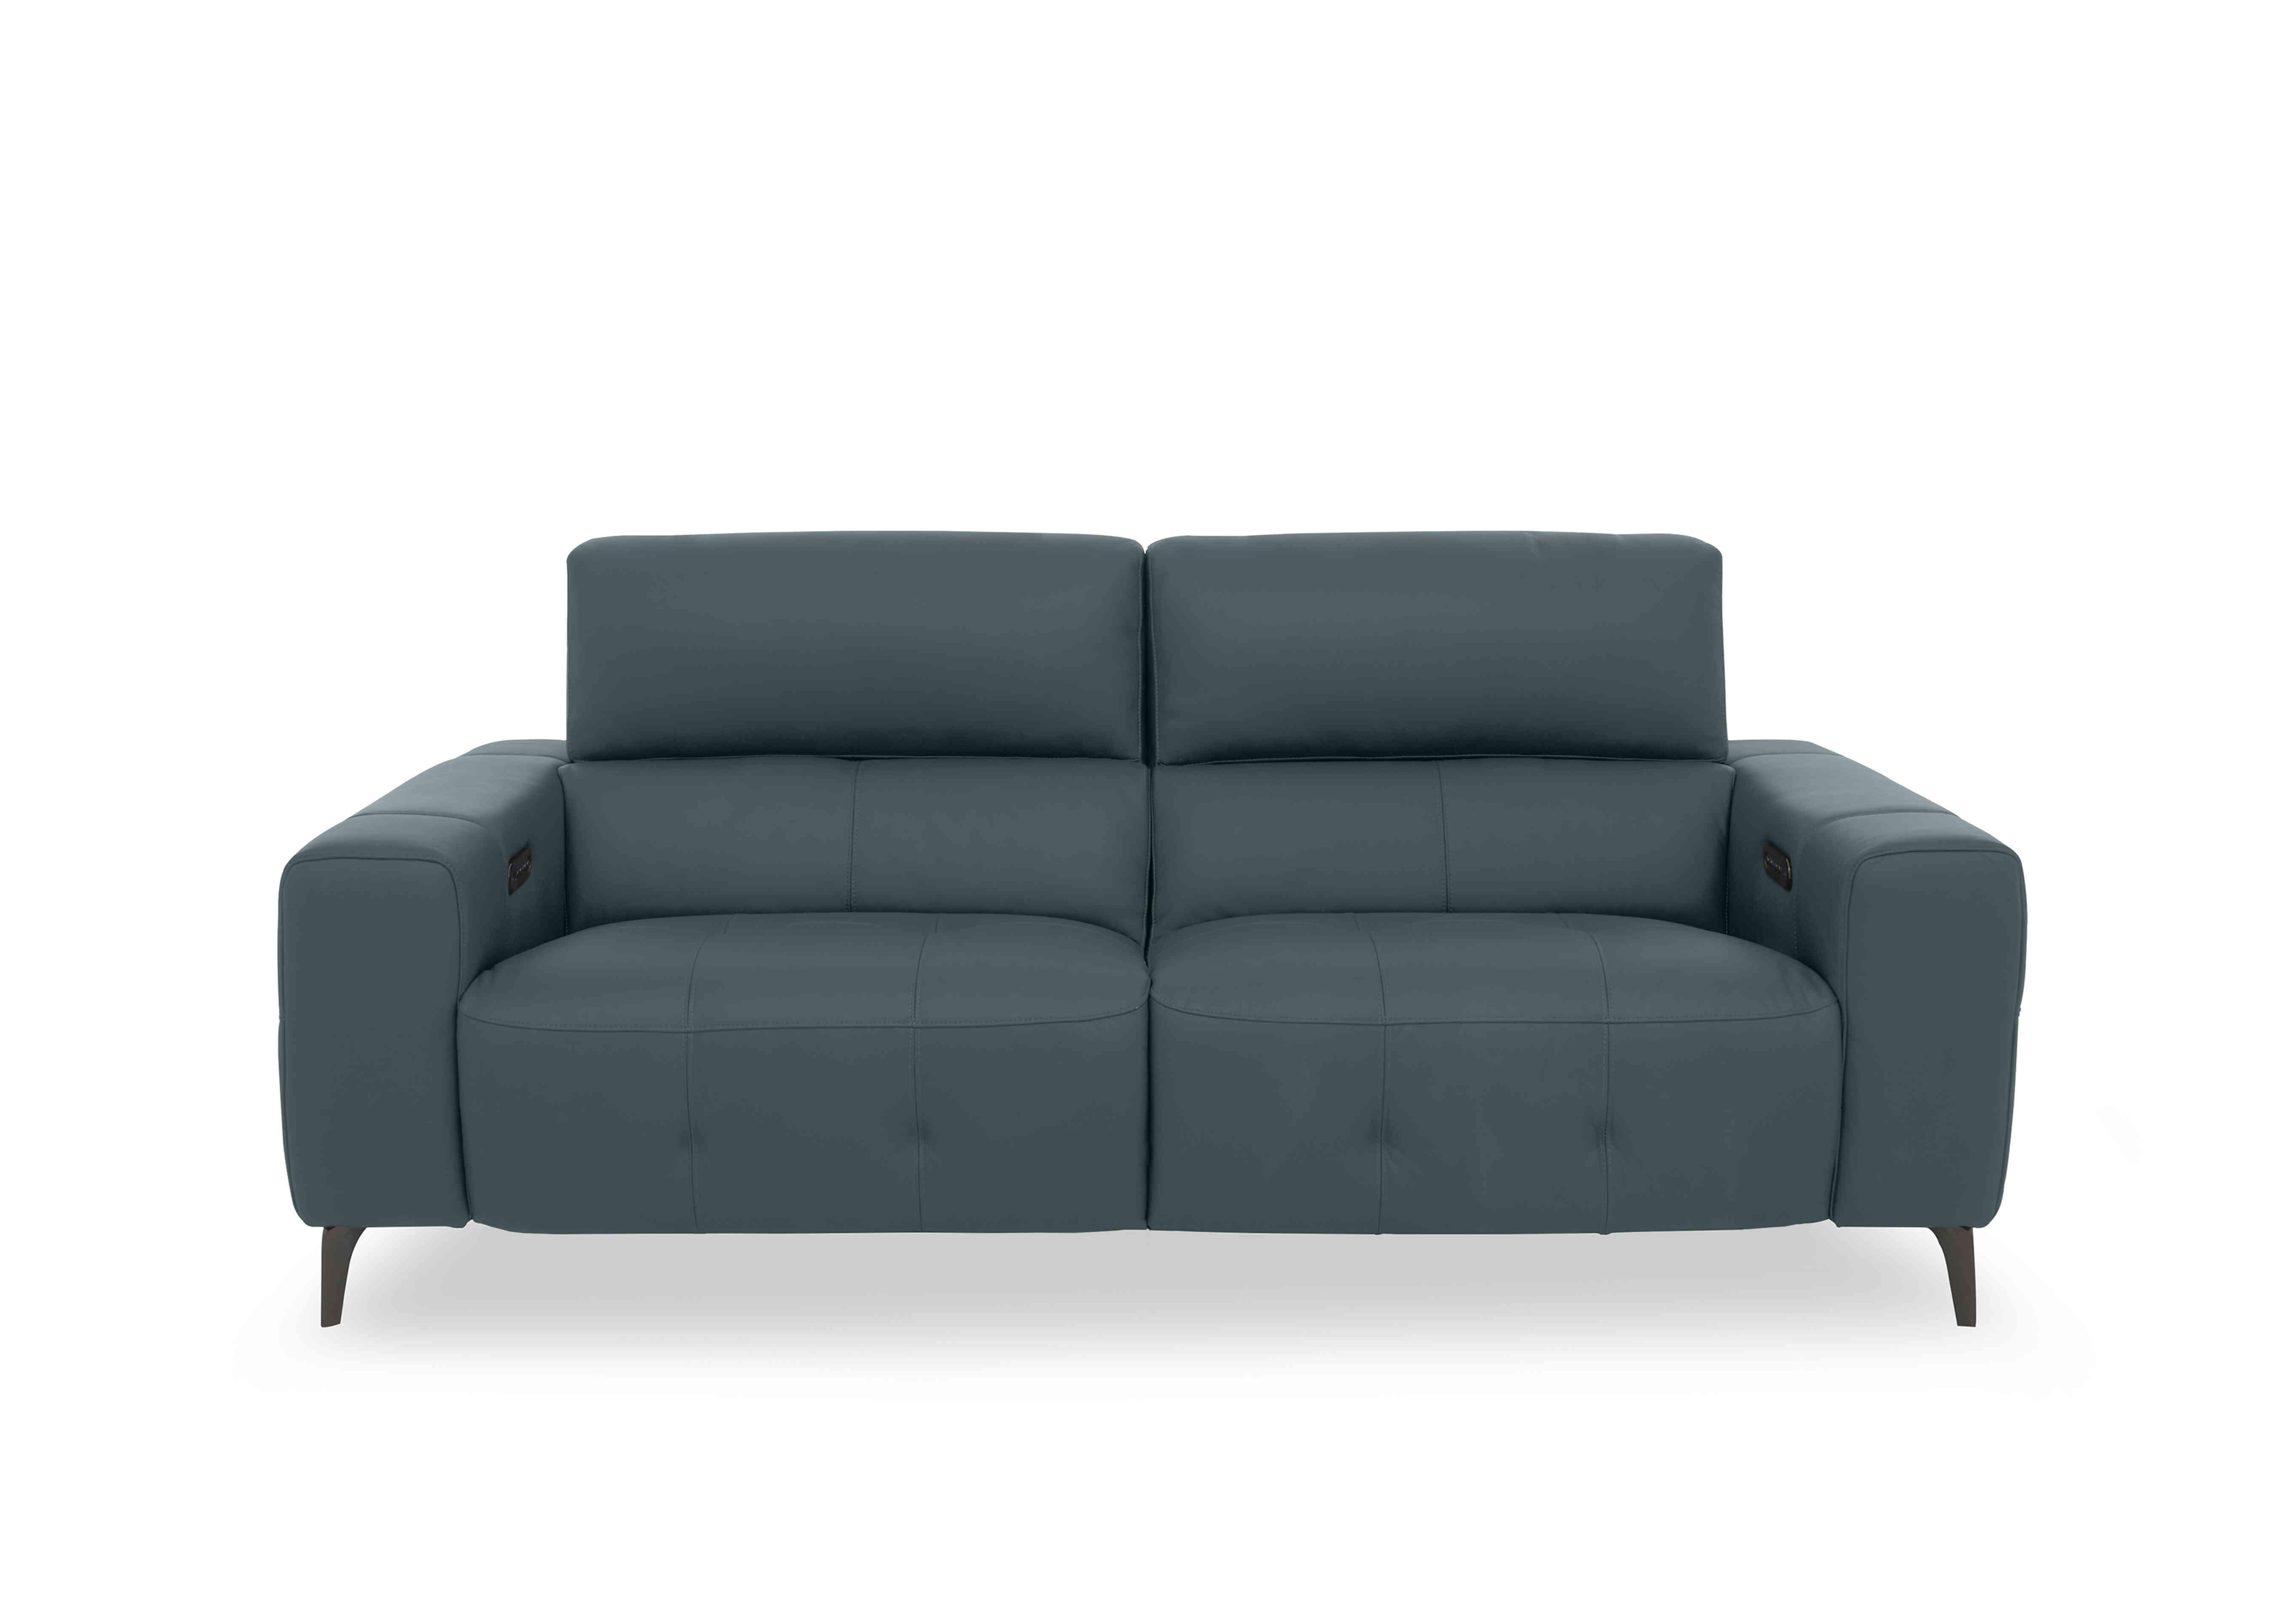 New York 3 Seater Leather Sofa in Bv-301e Lake Green on Furniture Village